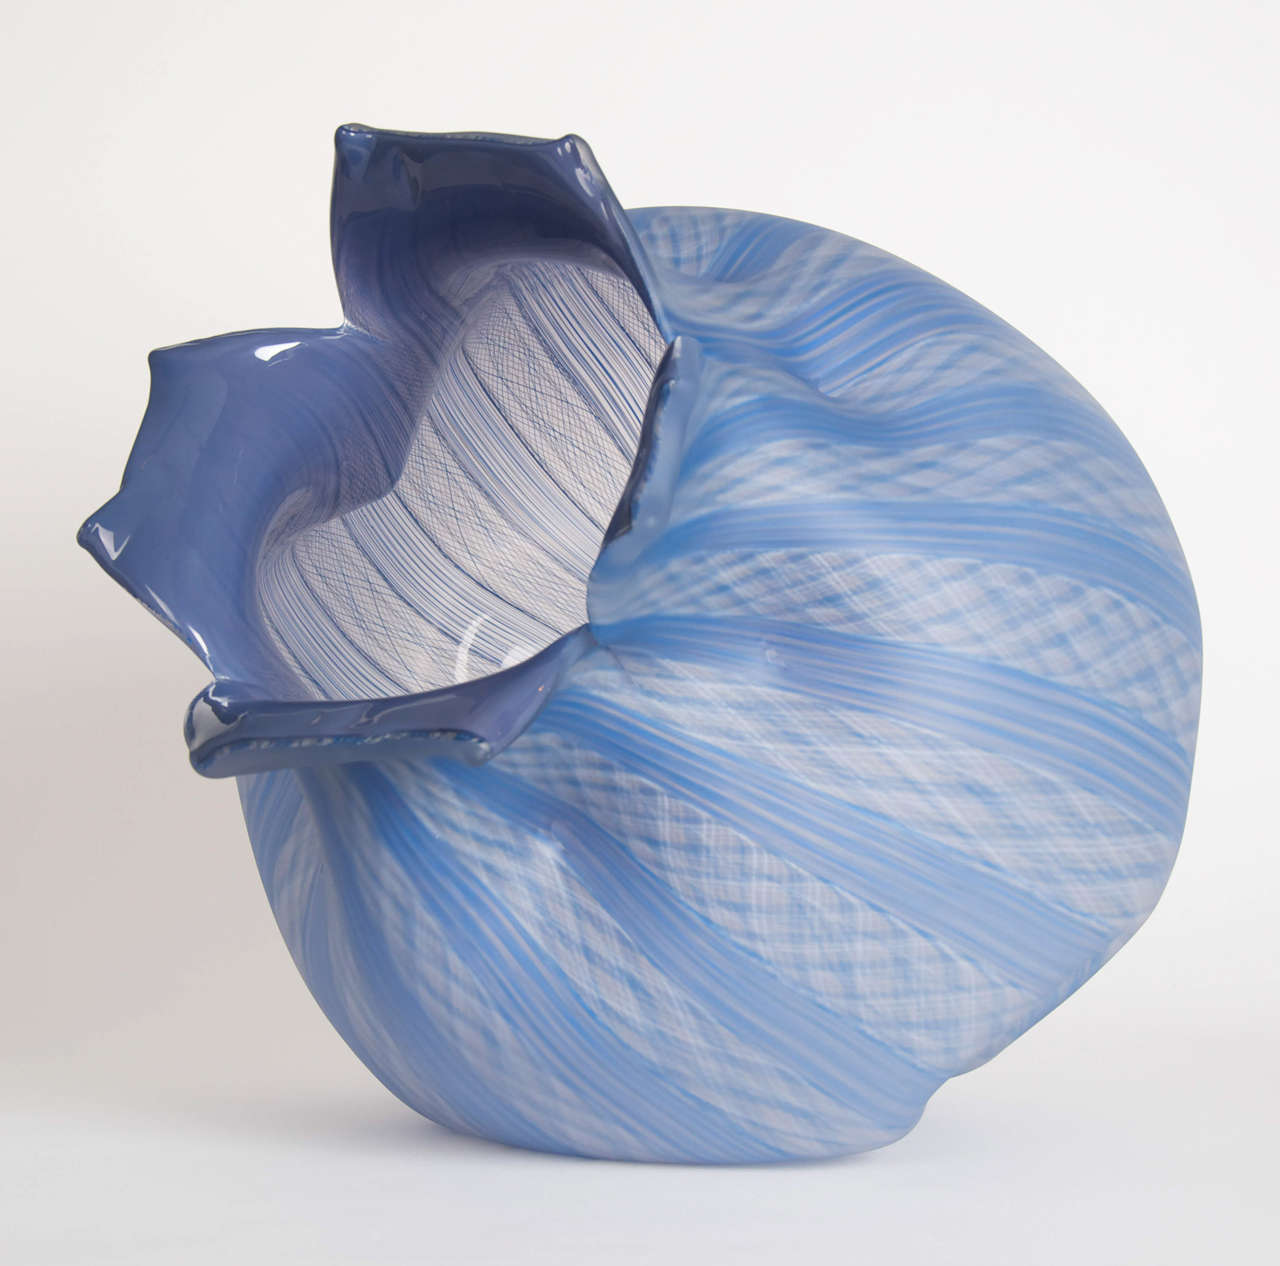 The large sculpture in pale blue color with white filigrana is one of the finest examples of large-scale free-form blown studio glass. Unique piece by Jeremy Maxwell Wintrebert. 

